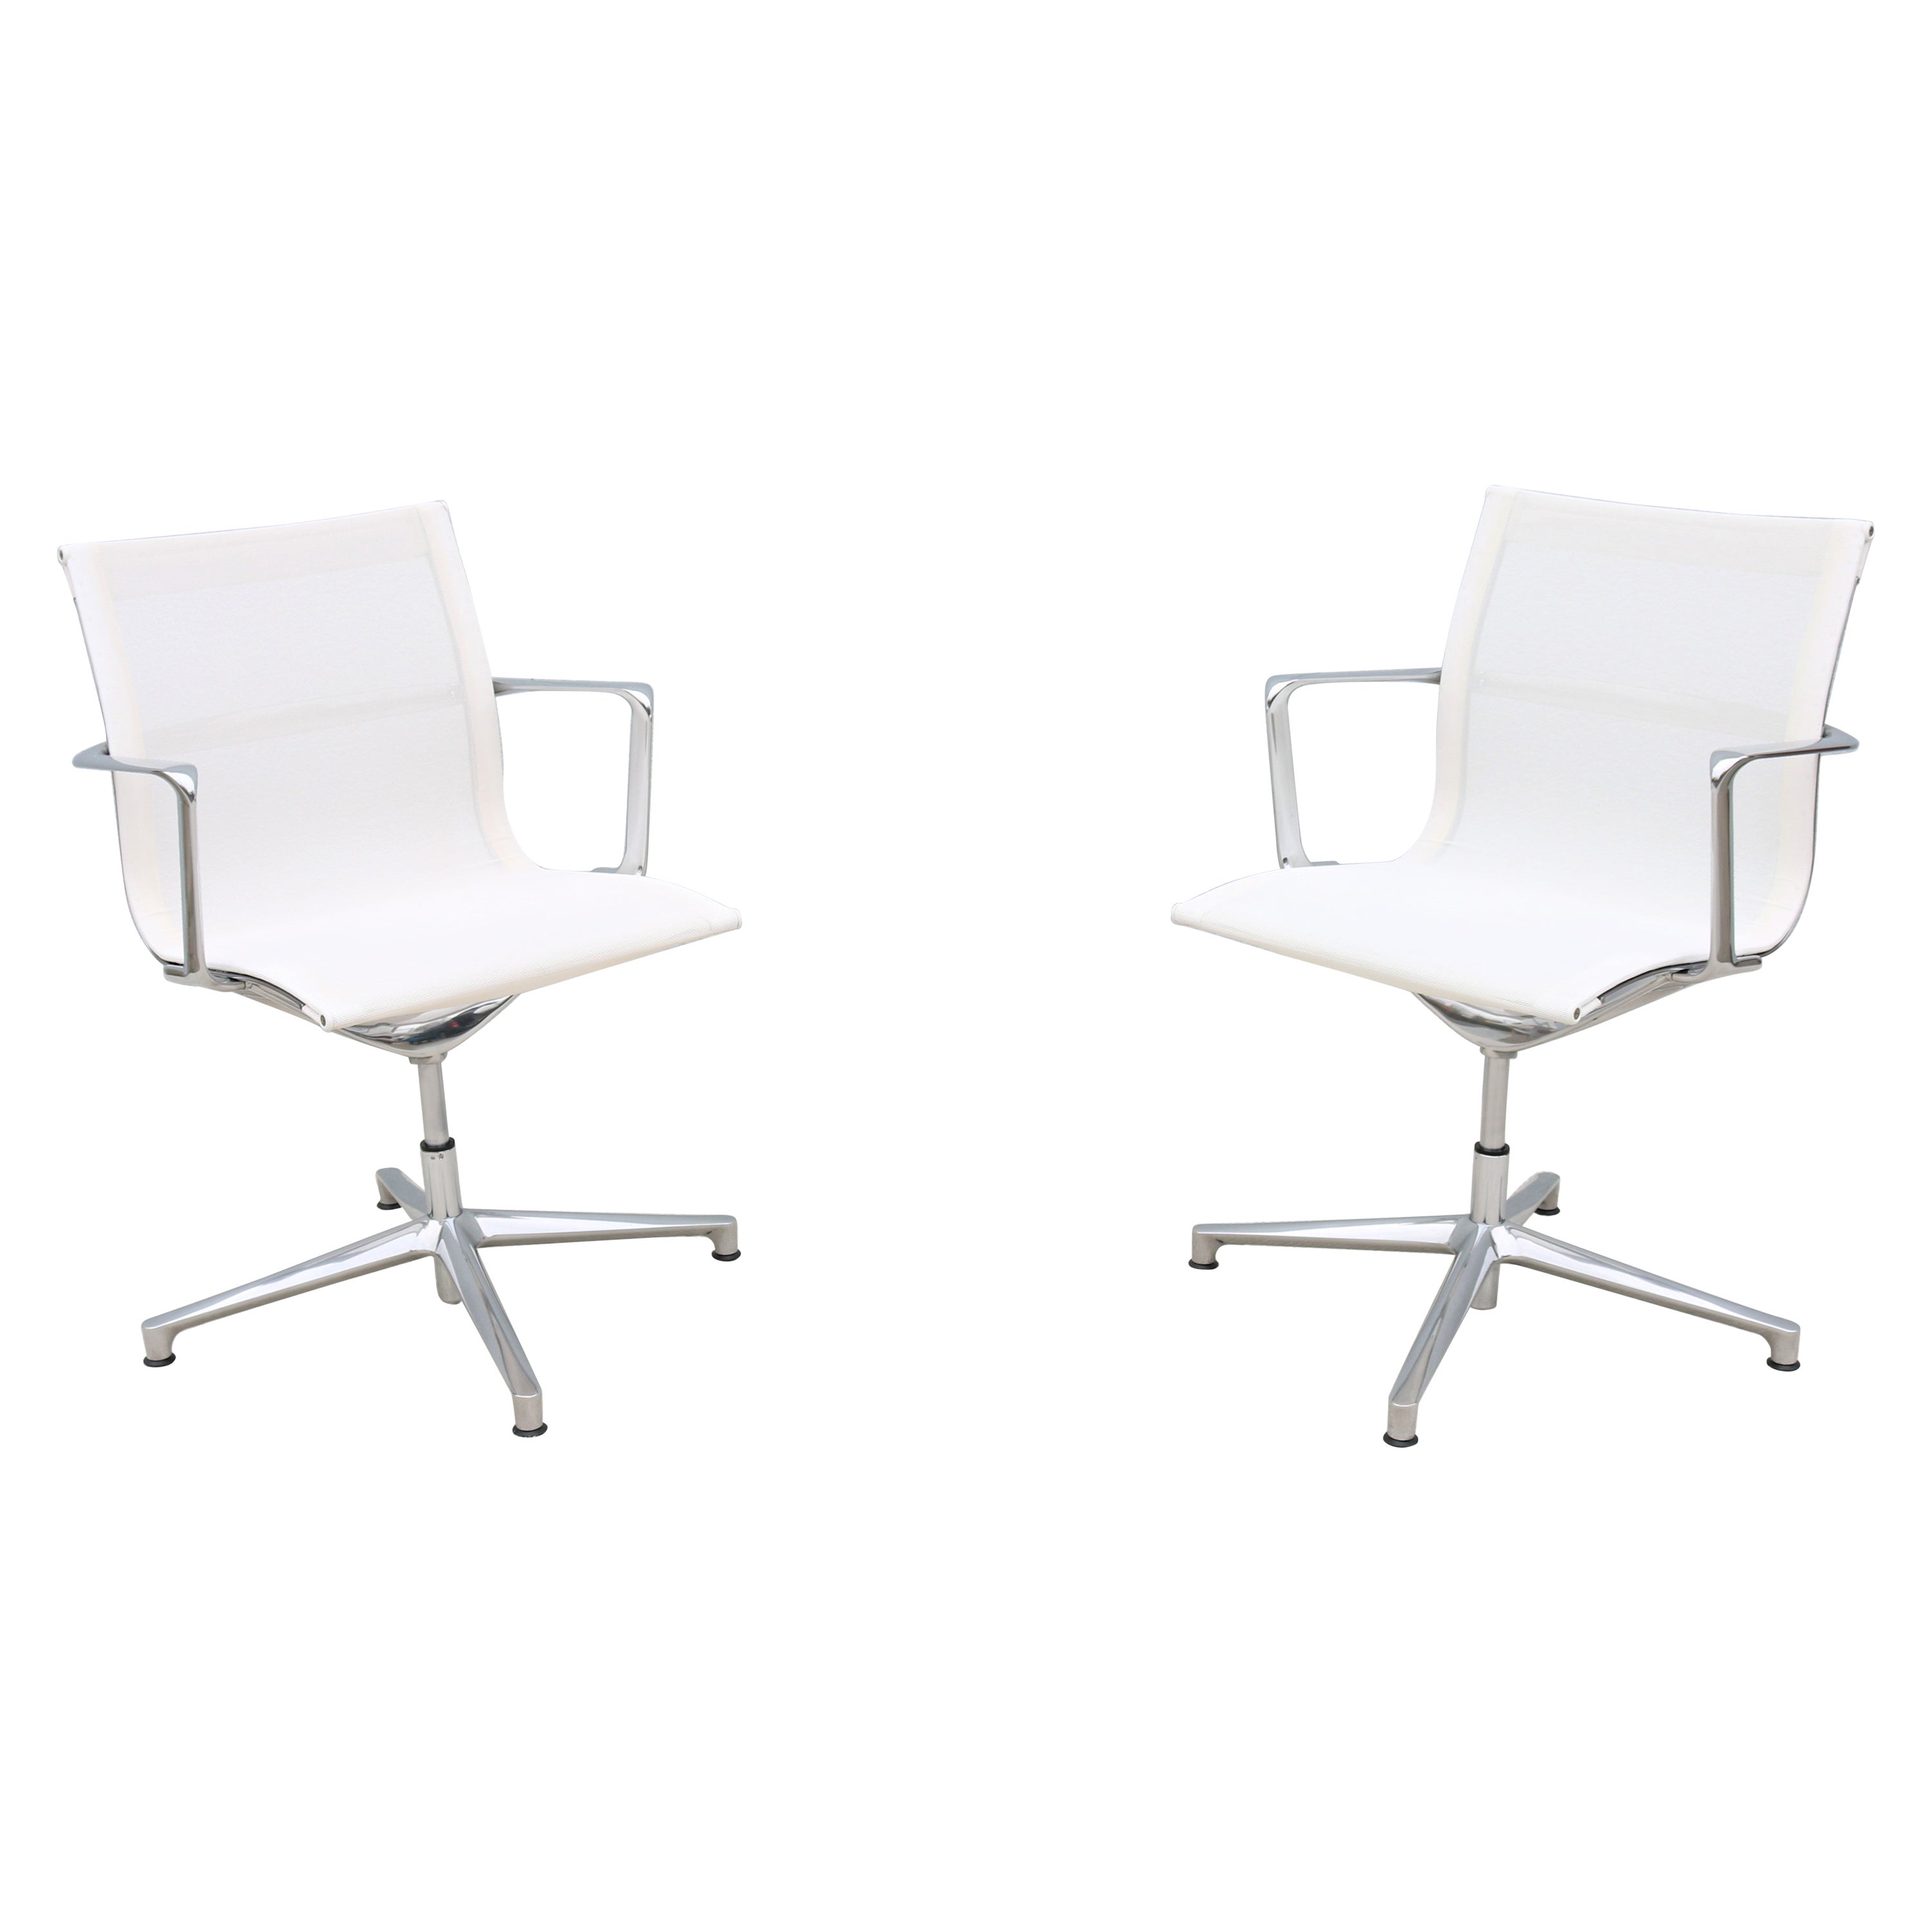 Mid-Century Modern Style ICF Office UNA Aluminum & Mesh Swivel Armchairs, a Pair For Sale